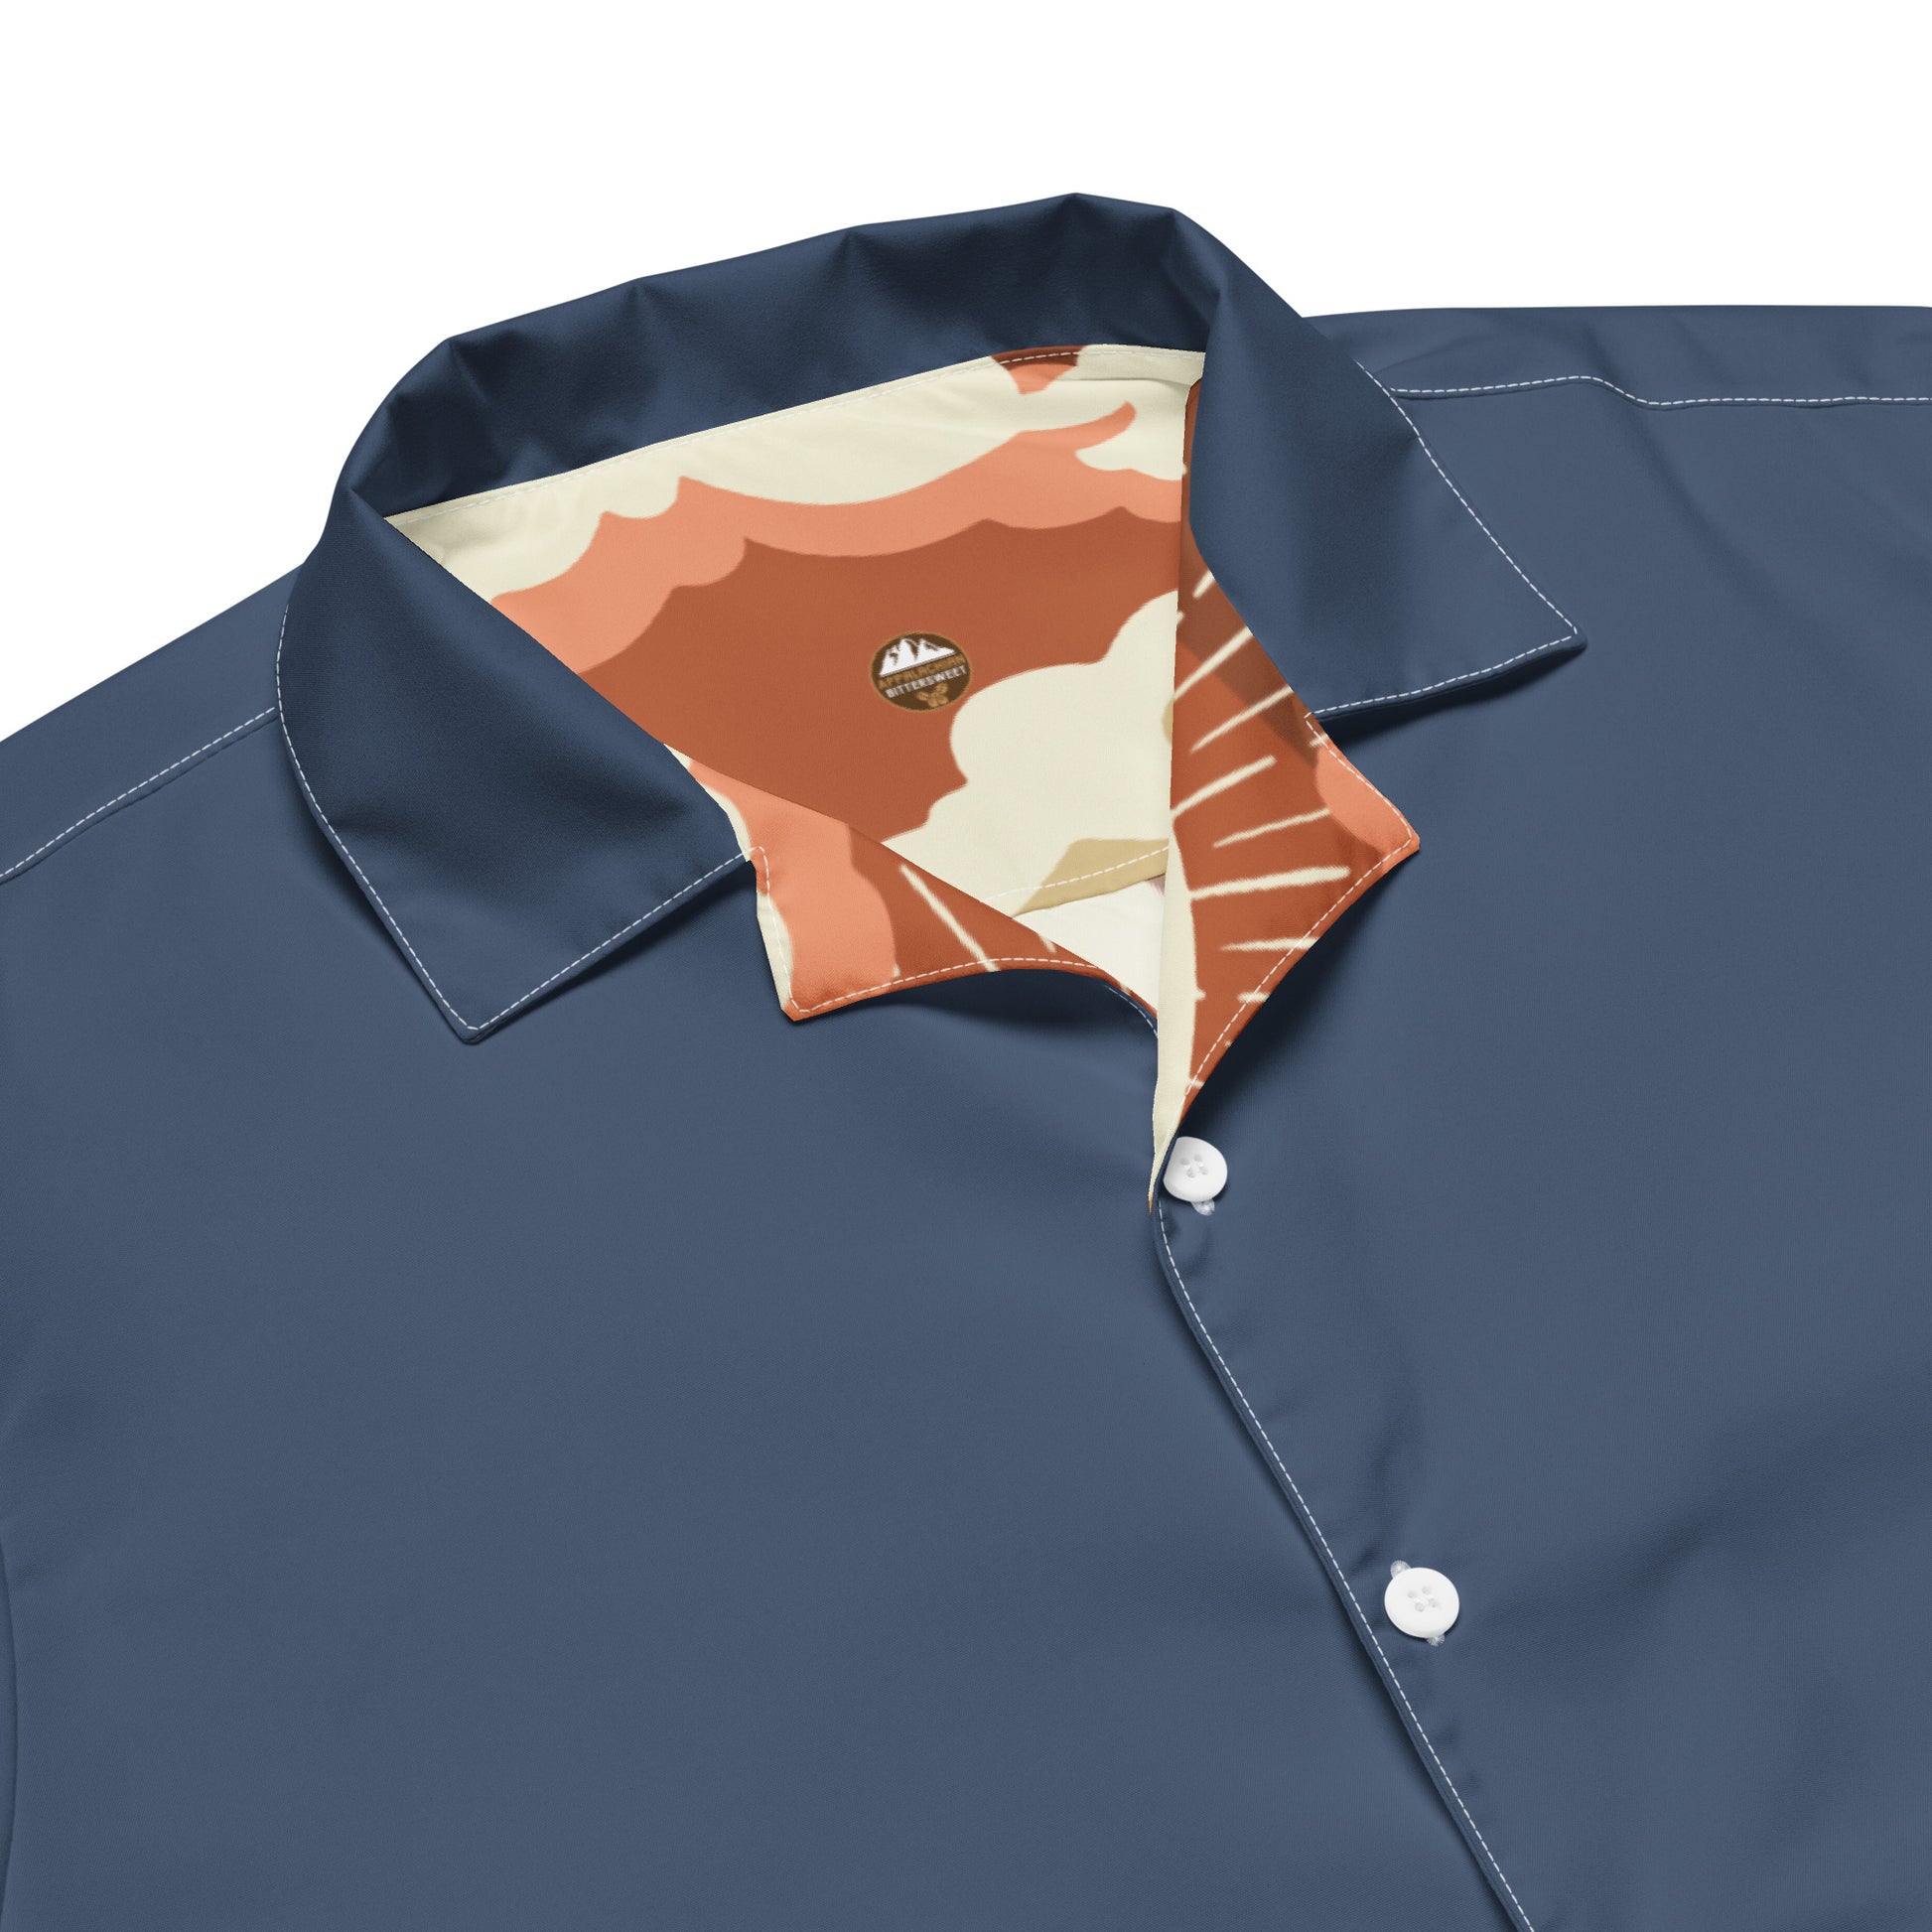 Meet your new favorite Men’s Women’s Button Sun protective Shirt for Hiking; our UPF 50+ short sleeve sun Protective shirt from Appalachian Bittersweet!